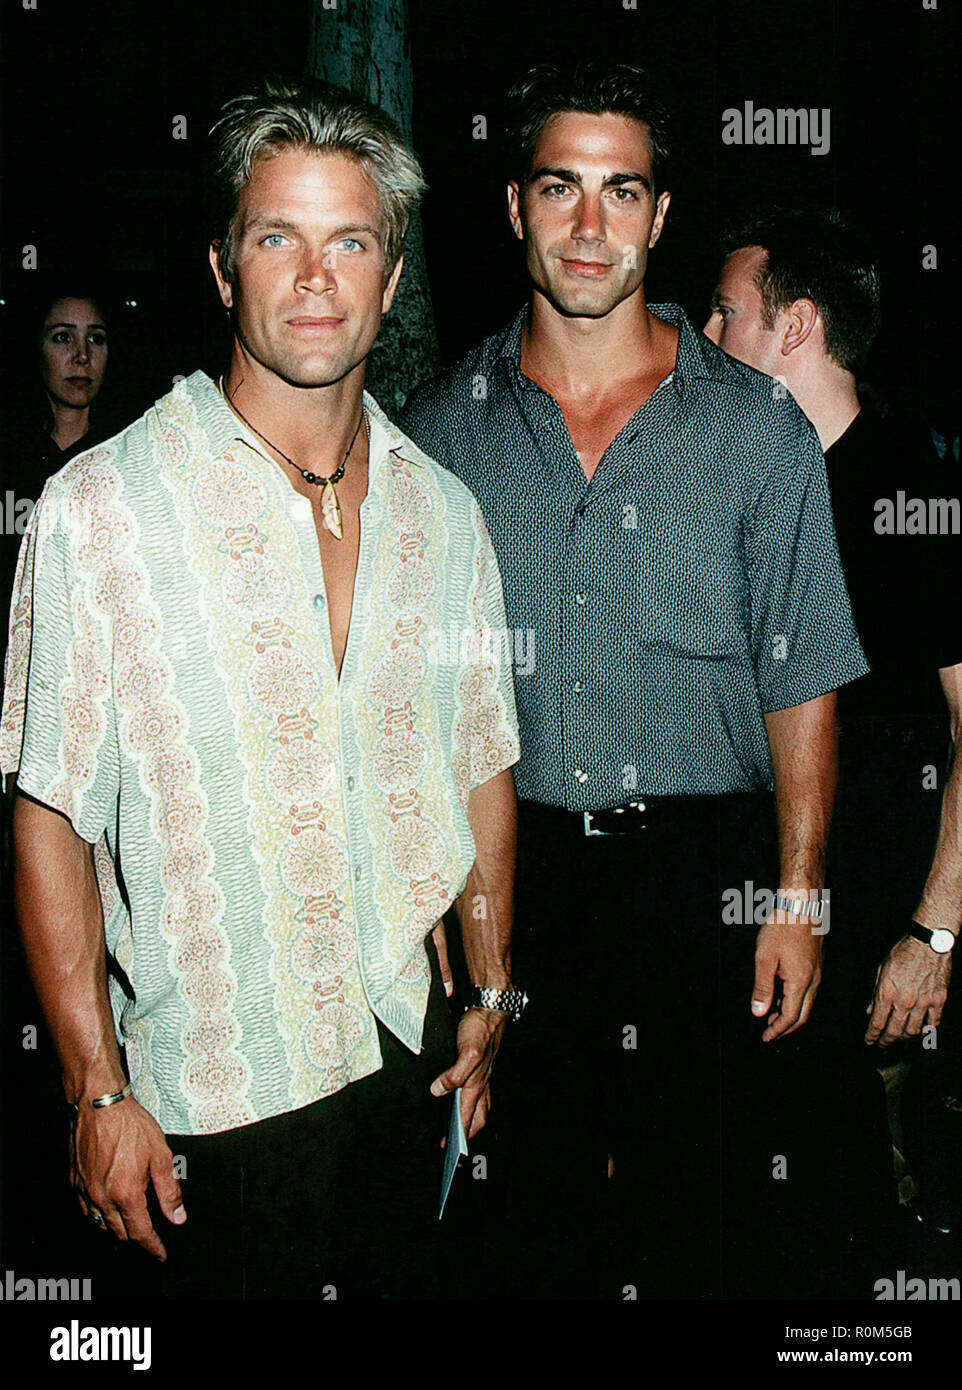 David Chokachi, Michael Bergin ÉÉ.. Event in Hollywood Life - California, USA, Film Industry, Celebrities, Photography, Bestof, Arts Culture and Entertainment, Topix Celebrities fashion, Best of, Hollywood Life,  Red Carpet and backstage, movie celebrities, TV celebrities, Music celebrities, Topix, Bestof, Arts Culture and Entertainment, vertical, one person, Photography,   #Celebrity #Hollywood #RedCarpet #Actor #Actress #famousCelebrity #HollywoodEvent #TsuniUSA #CelebrityPhotography, Fashion inquiry tsuni@Gamma-USA.com , Credit Tsuni / USA,   Fashion, From the Year 1993 to 1999, Stock Photo